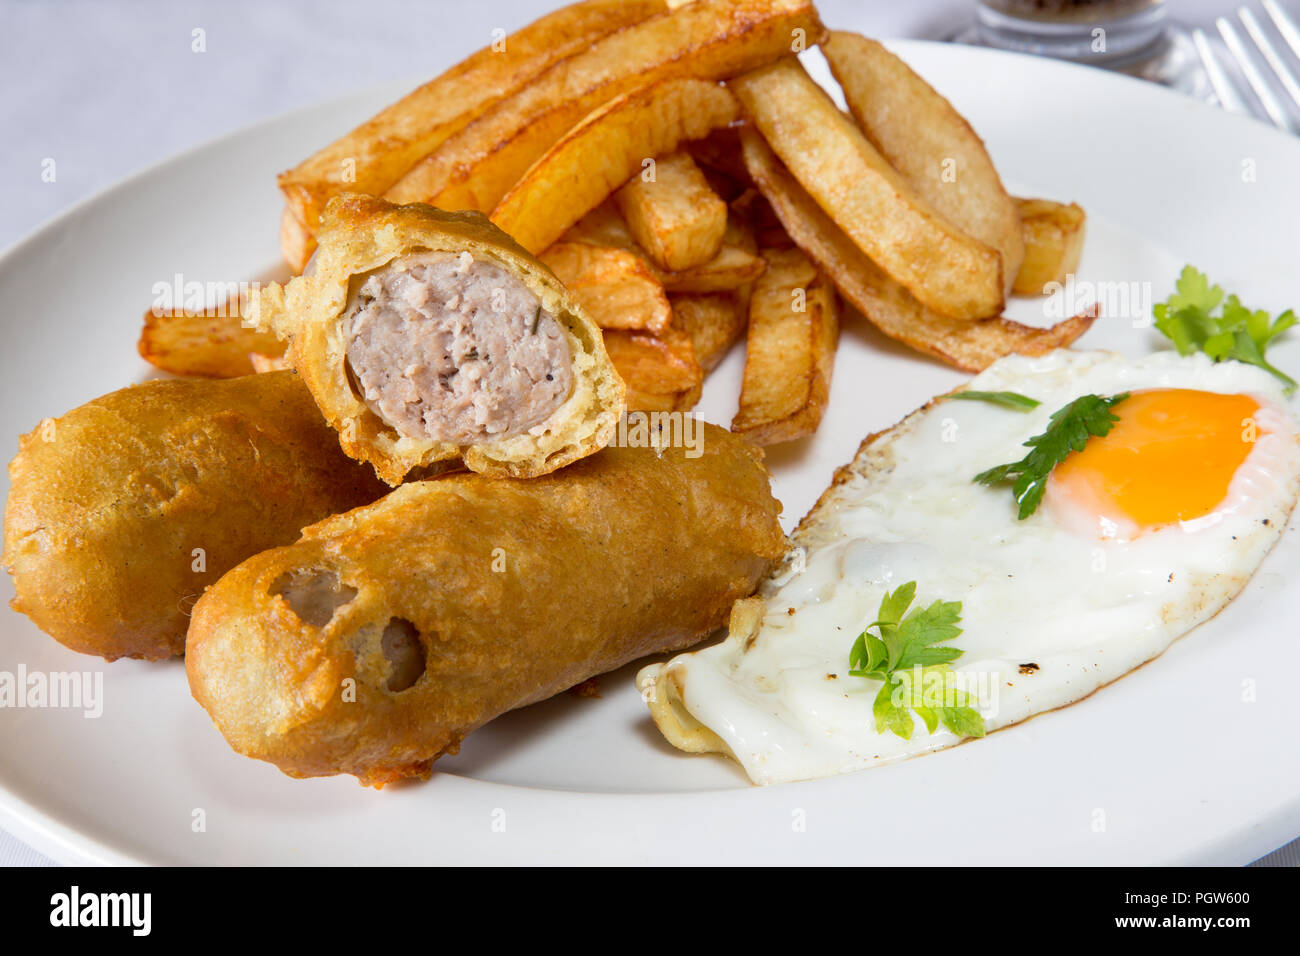 Traditional English supper of deep fried battered sausage with chips/fries and a fried egg Stock Photo